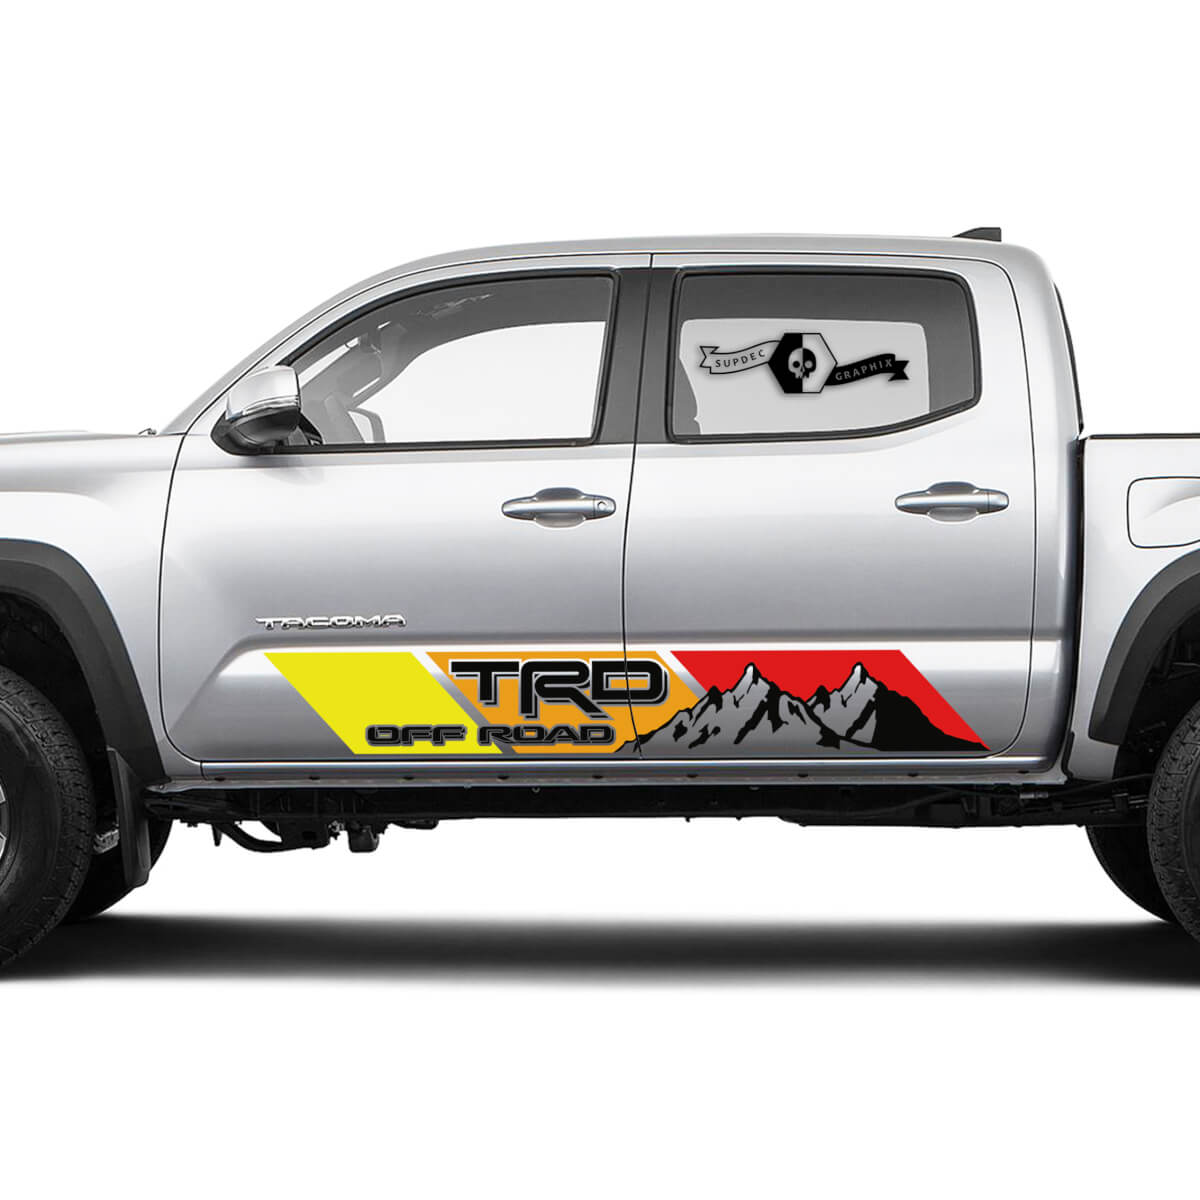 2 side TRD Mountain Off Road Rocker Panel Vinyl Stickers Vintage TOYOTA Colors Decals Stickers for Tacoma Tundra 4Runner Hilux